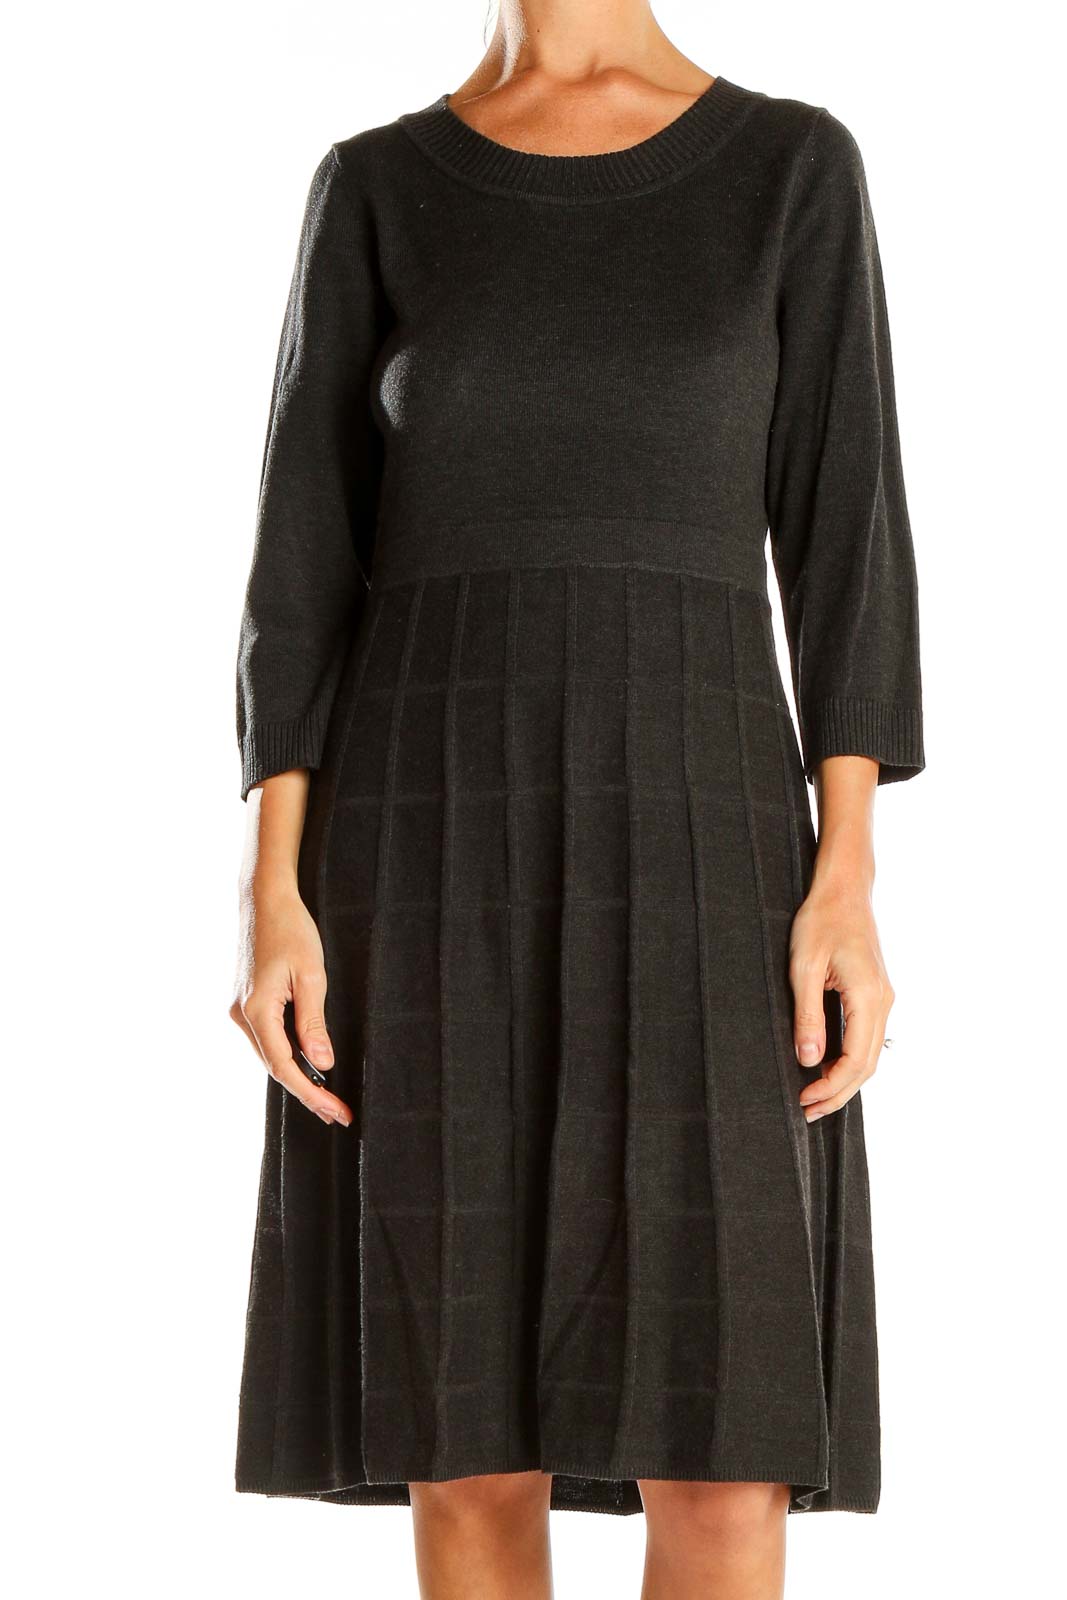 Gray Pleated Fit & Flare Knit Dress Front